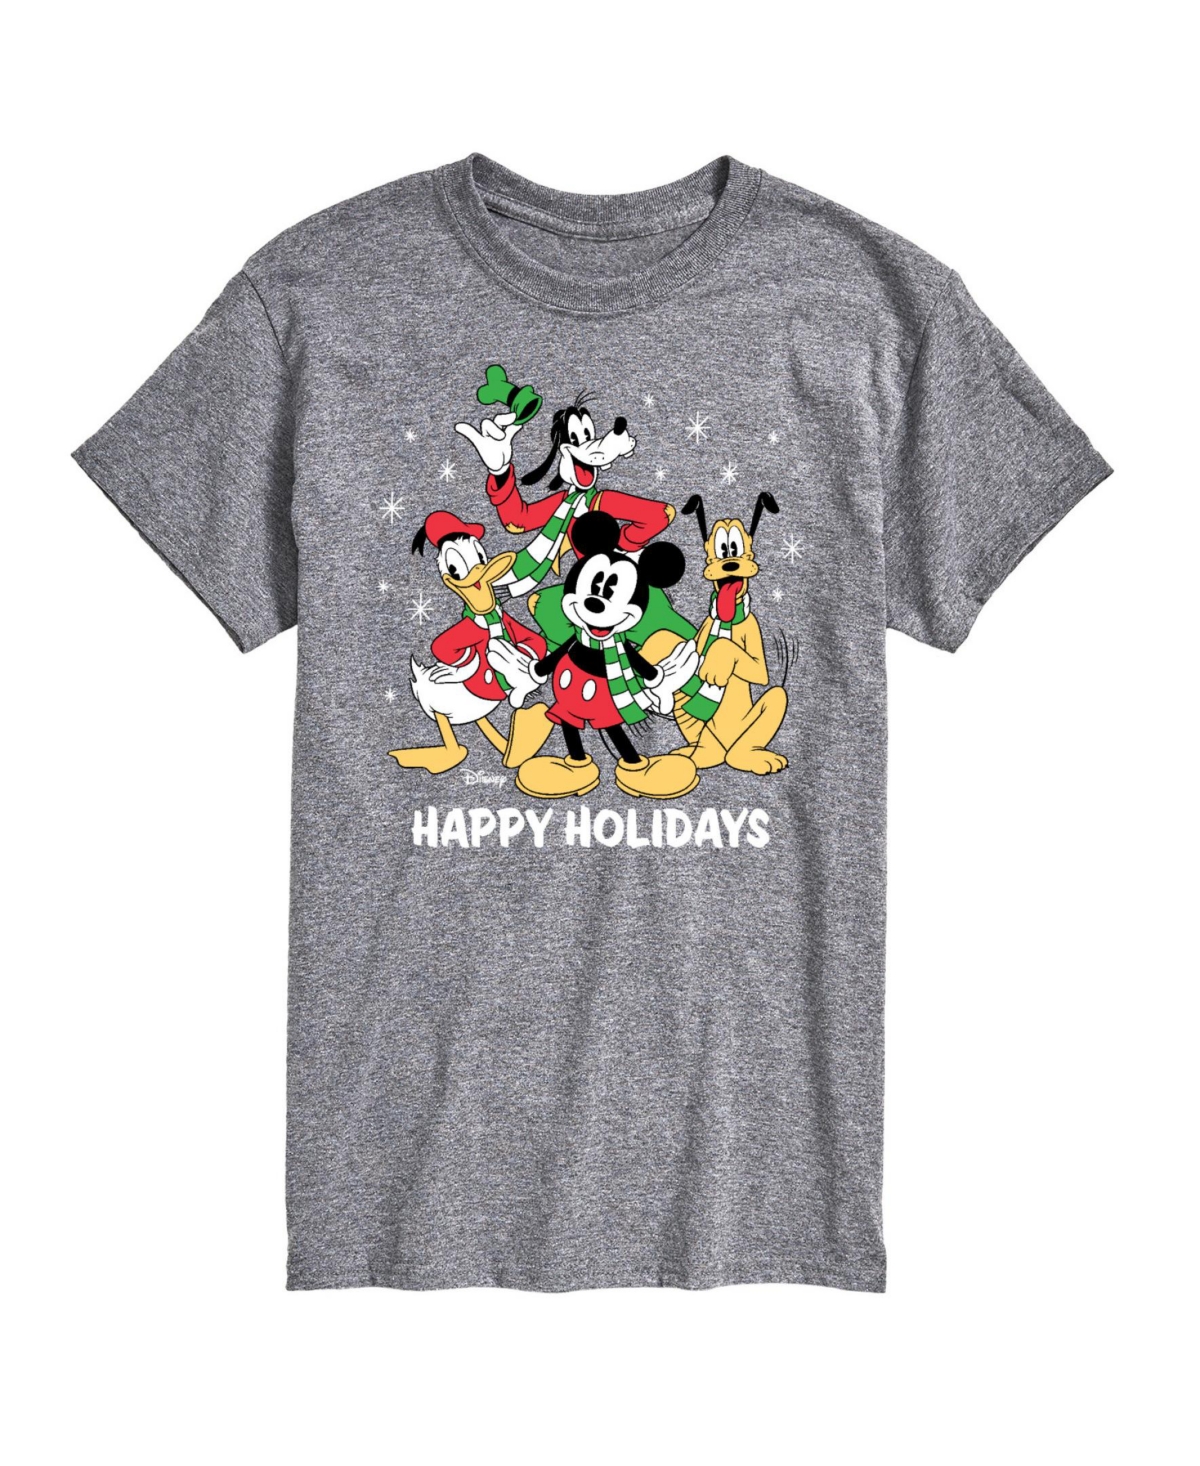 Airwaves Men's Disney Holiday Short Sleeves T-shirt In Heather Charcoal